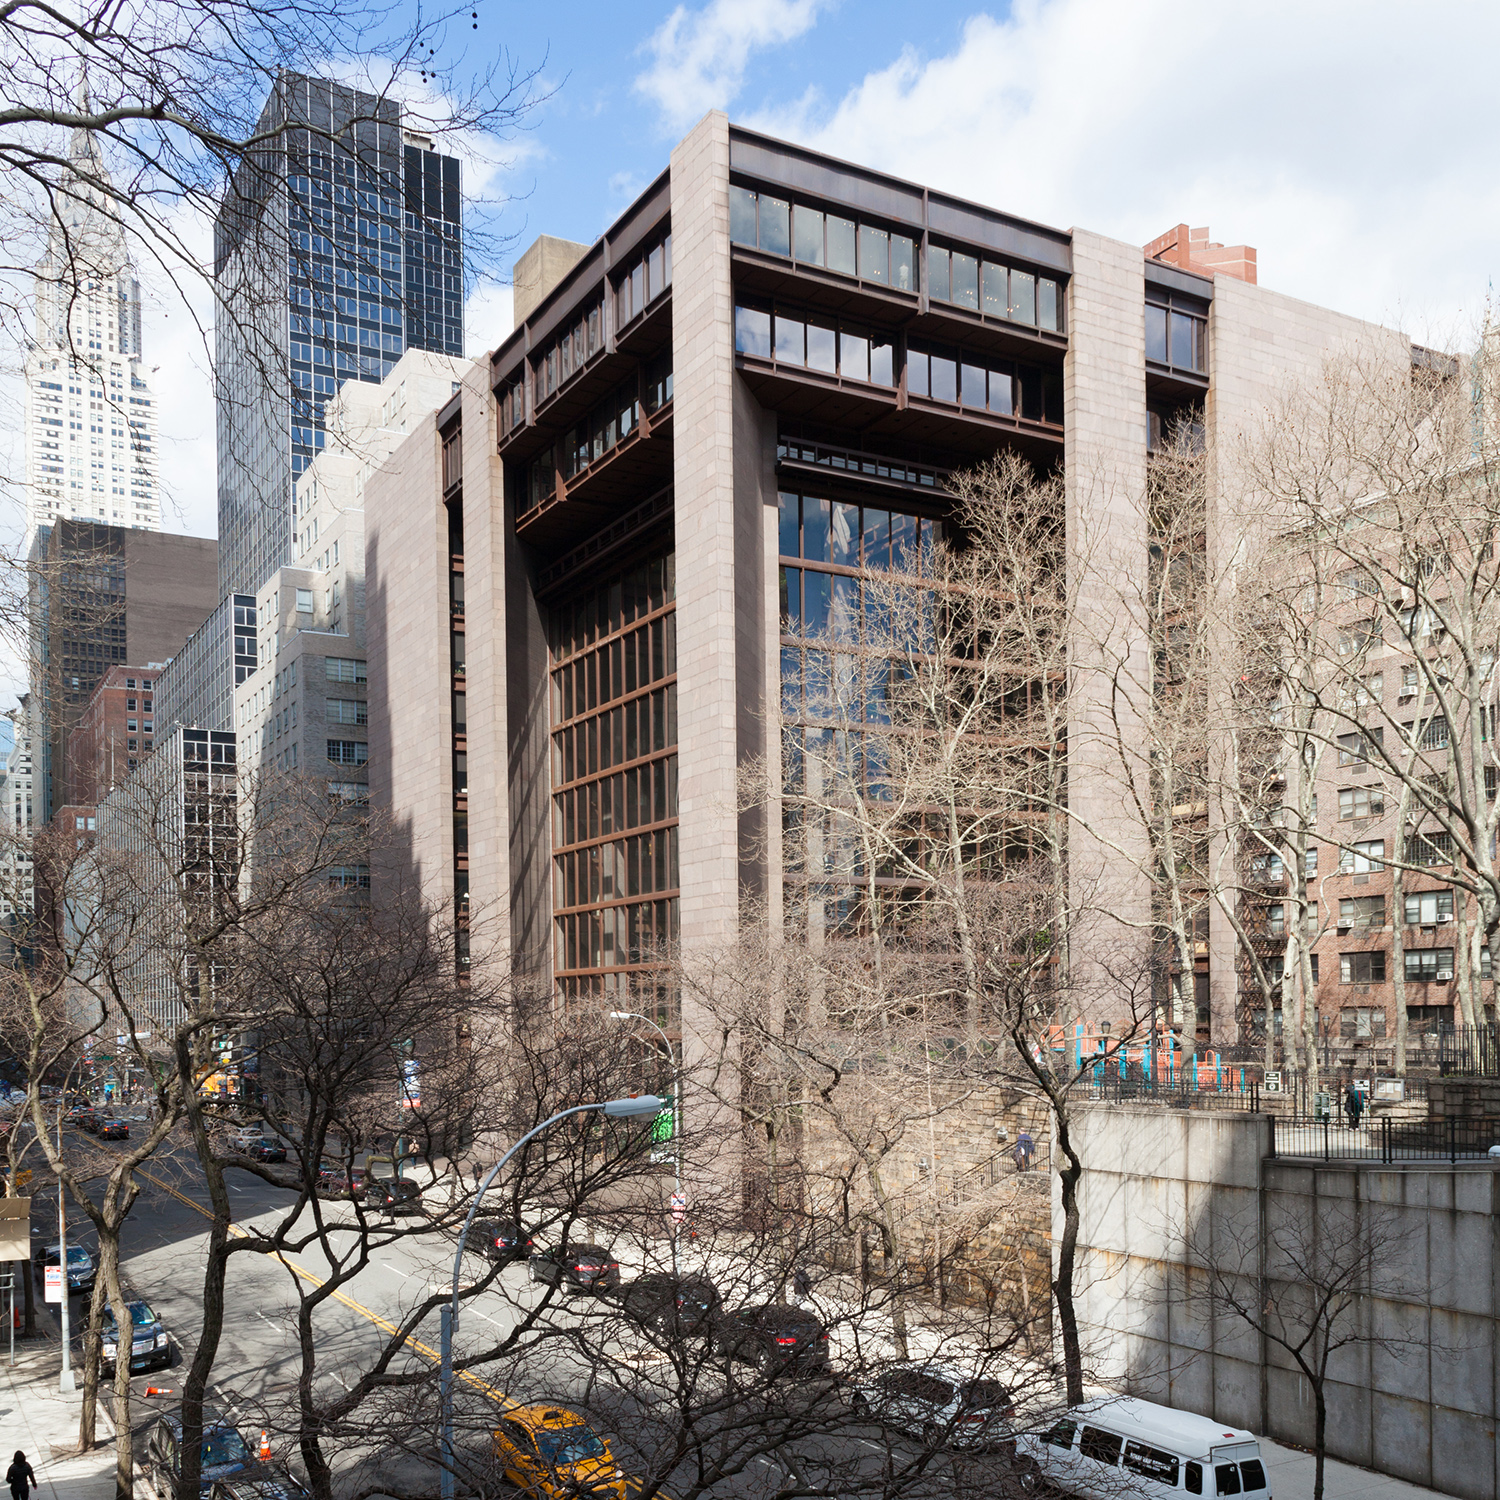 The Ford Foundation Building. Photo by Addison Godel/Flickr.